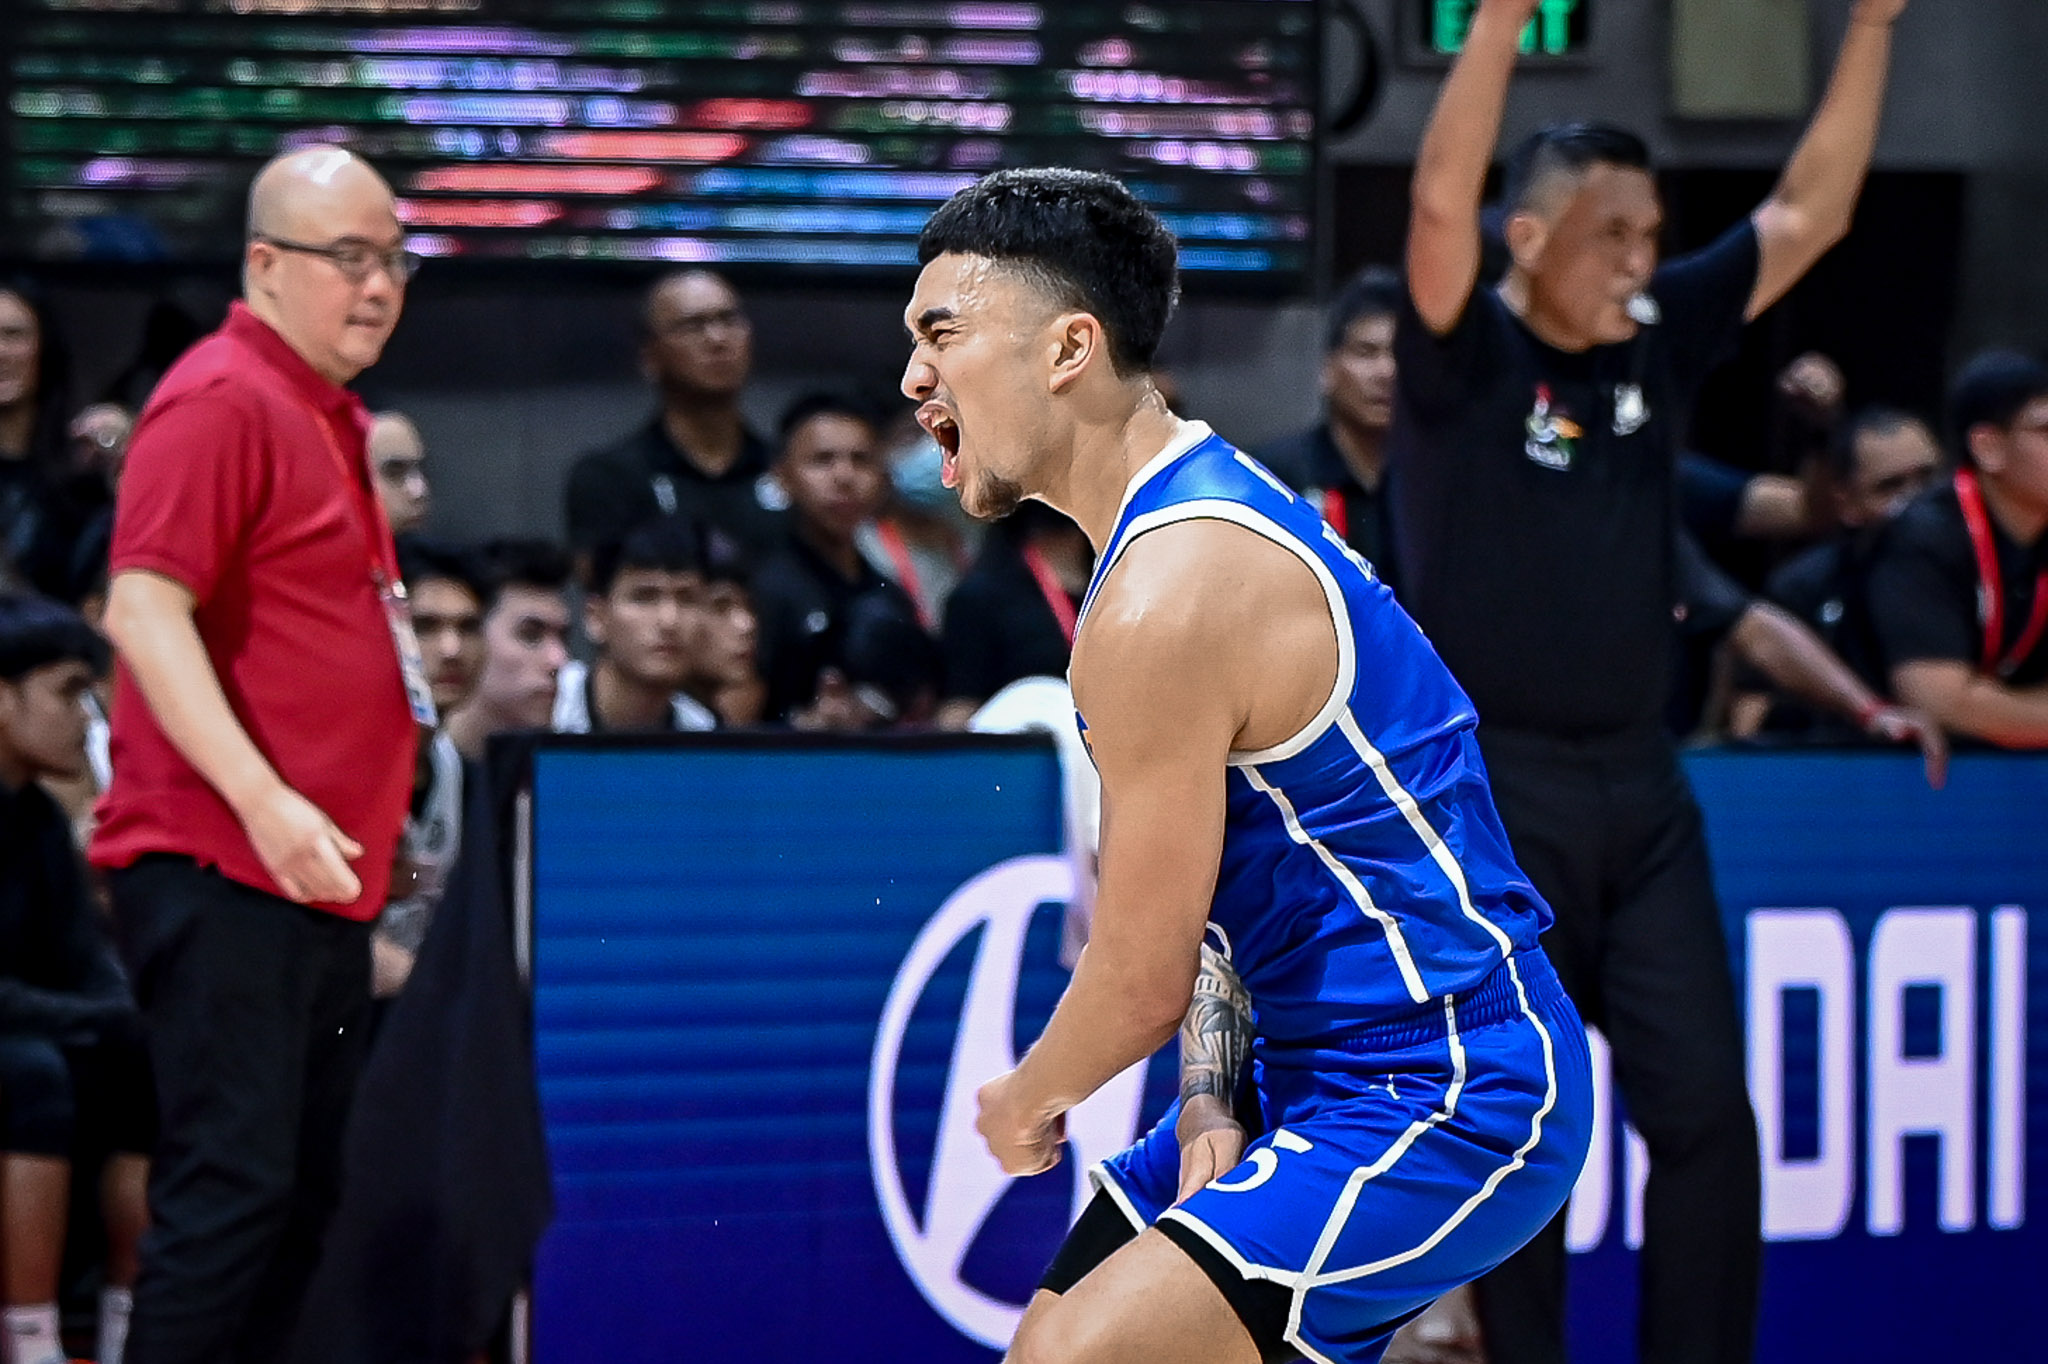 UAAP86-MBB-UP-vs-ATENEO-JARED-BROWN-4200 La Salle aims for top seed, Ateneo fights for Final Four entry ADMU Basketball DLSU News UAAP  - philippine sports news